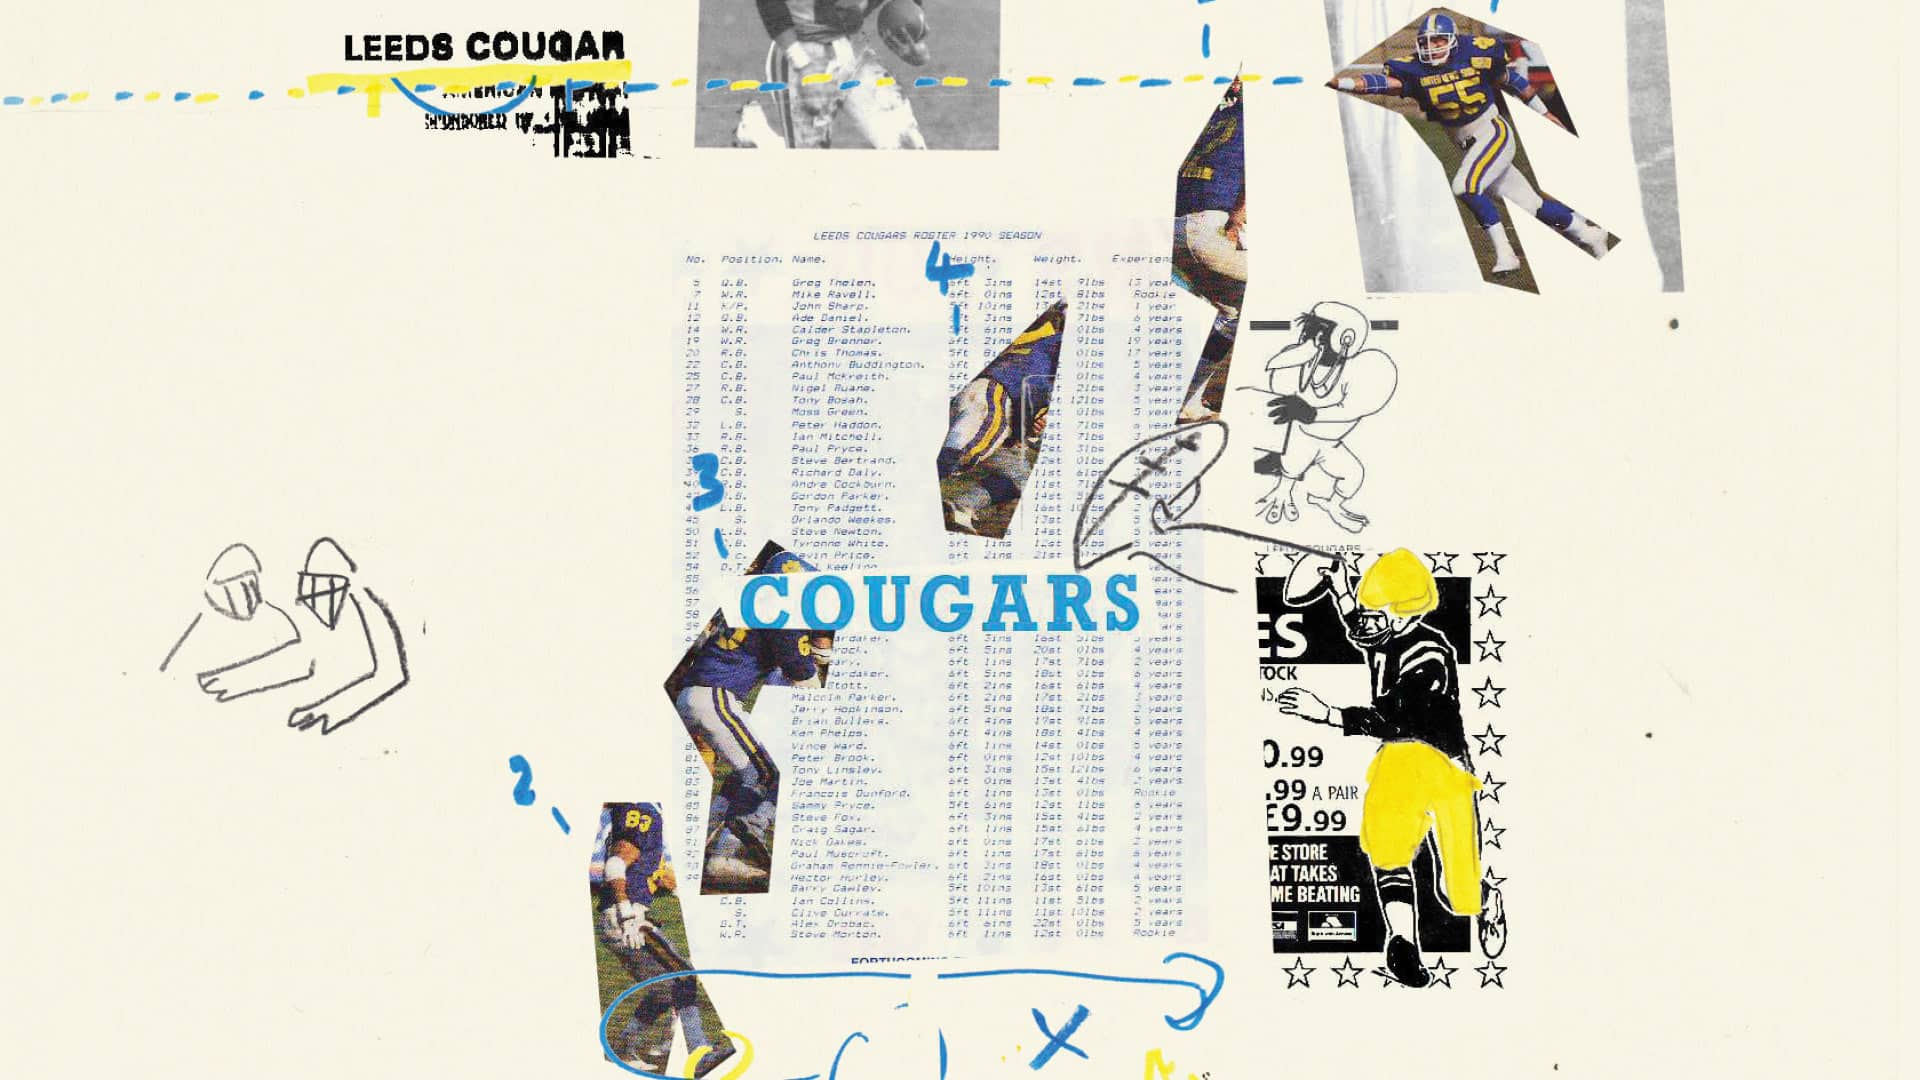 A scrapbook style collage of American football doodles, photos of Leeds Cougars players, and their original roster list